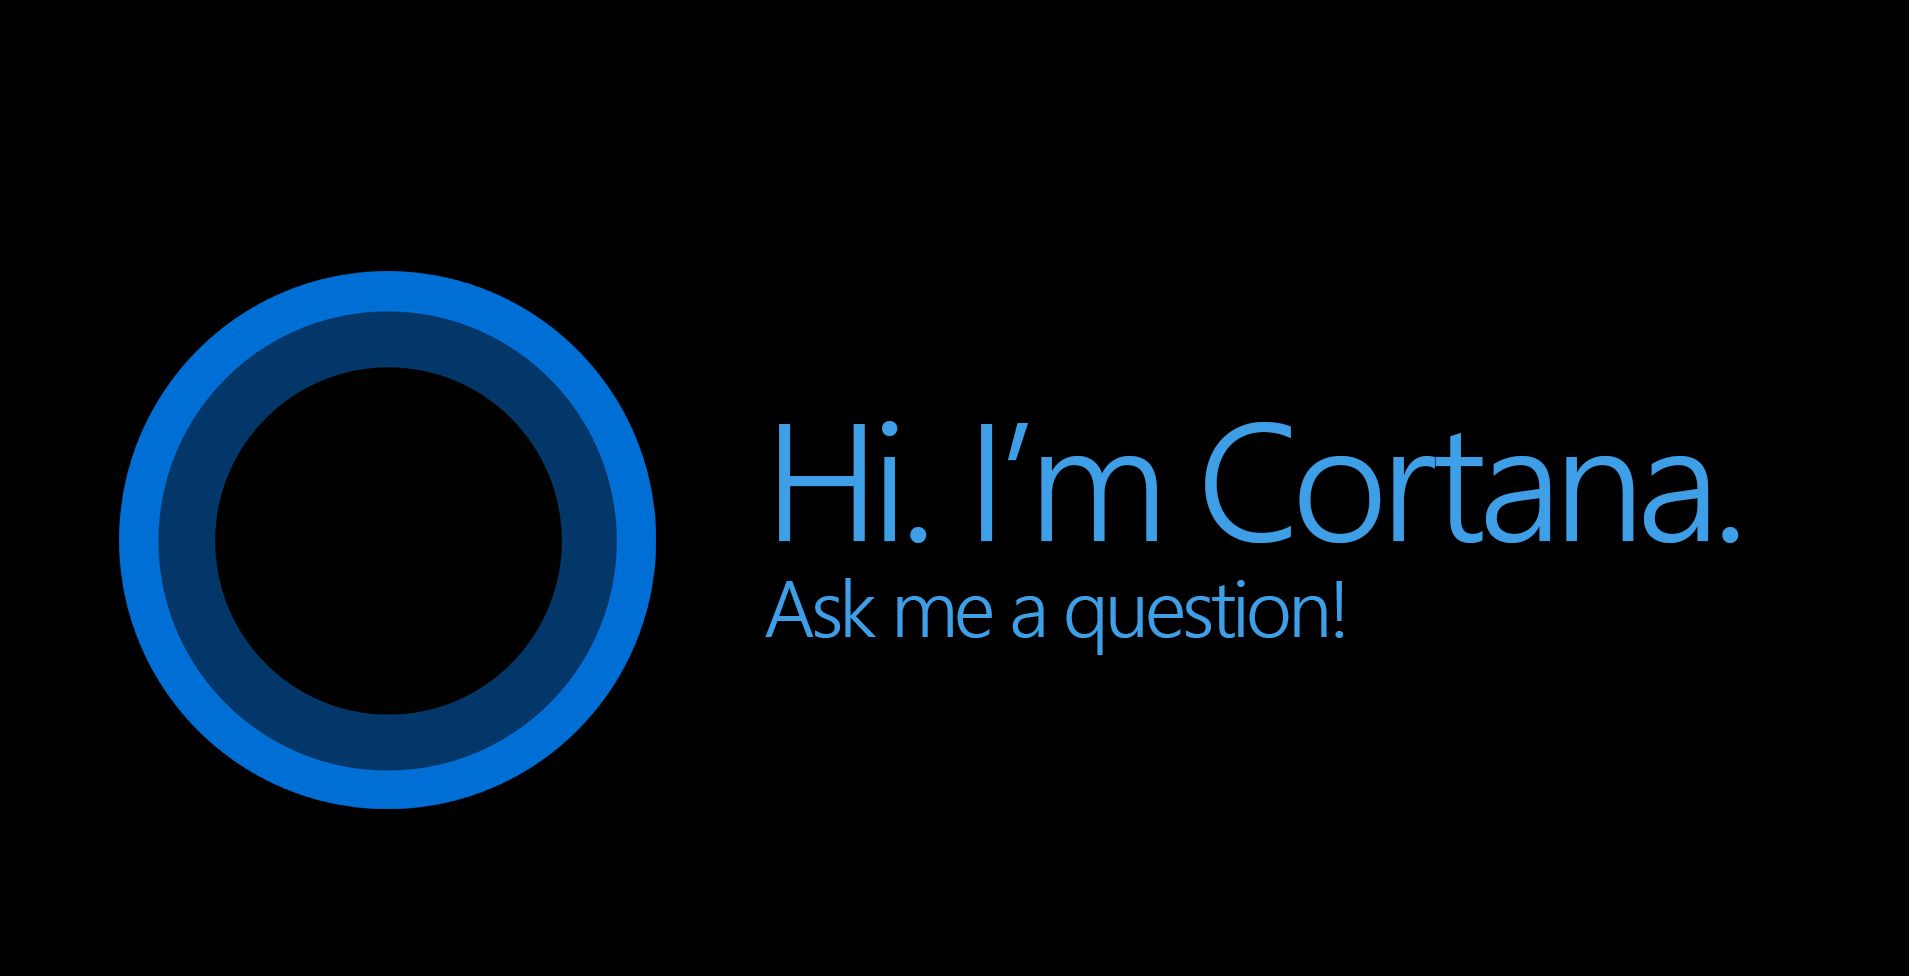 Cortana works only with Edge browser and Bing